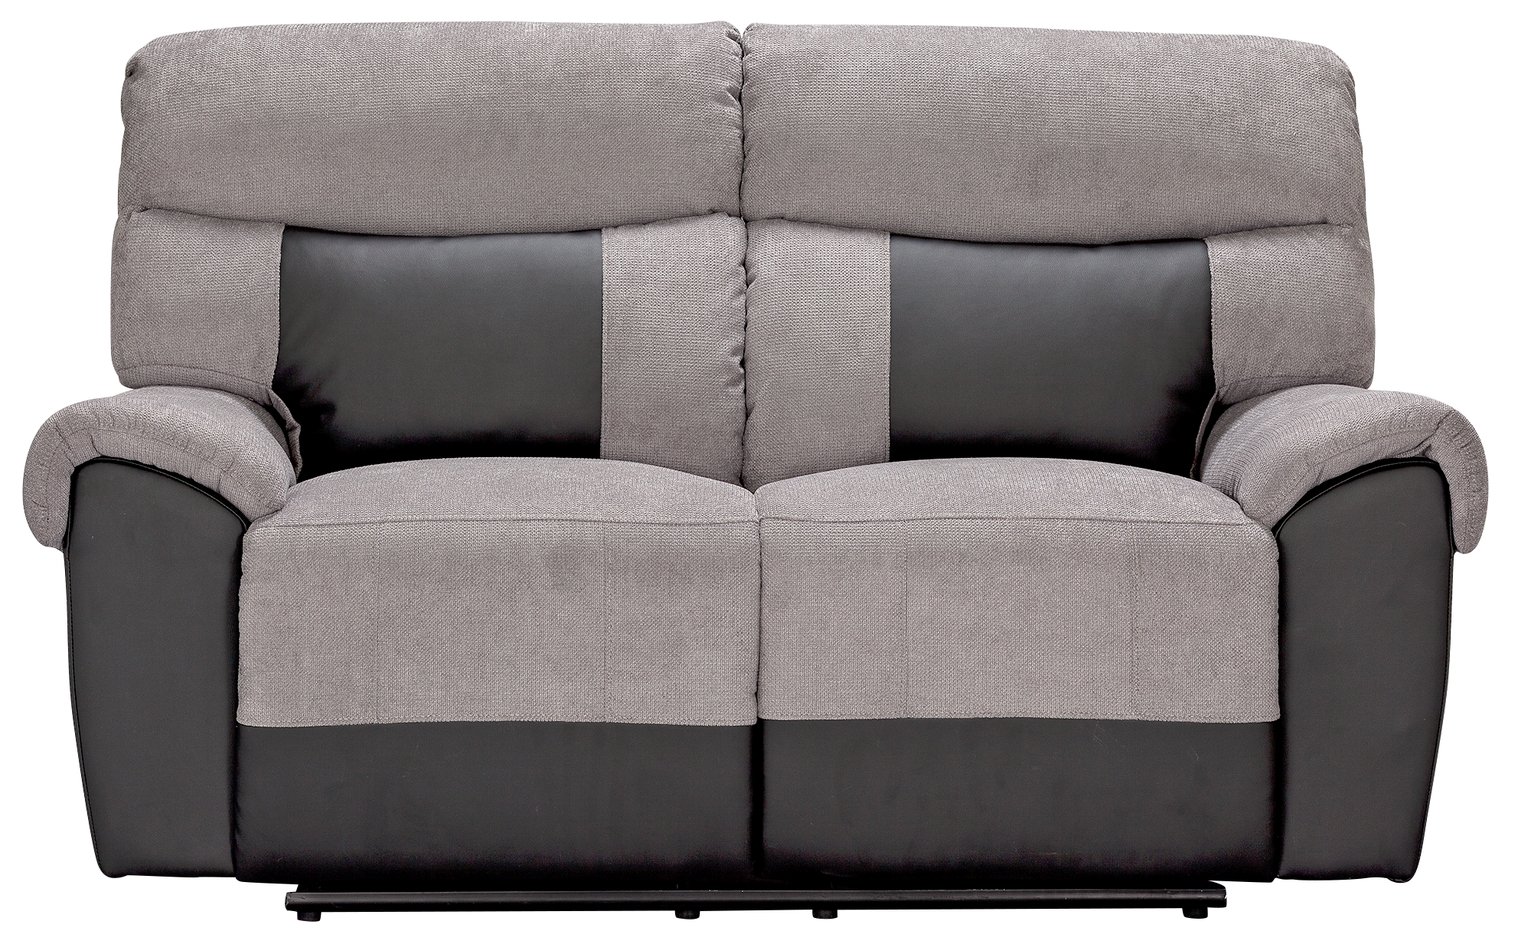 Argos Home Henry 2 Seater Fabric Recliner Sofa - Charcoal